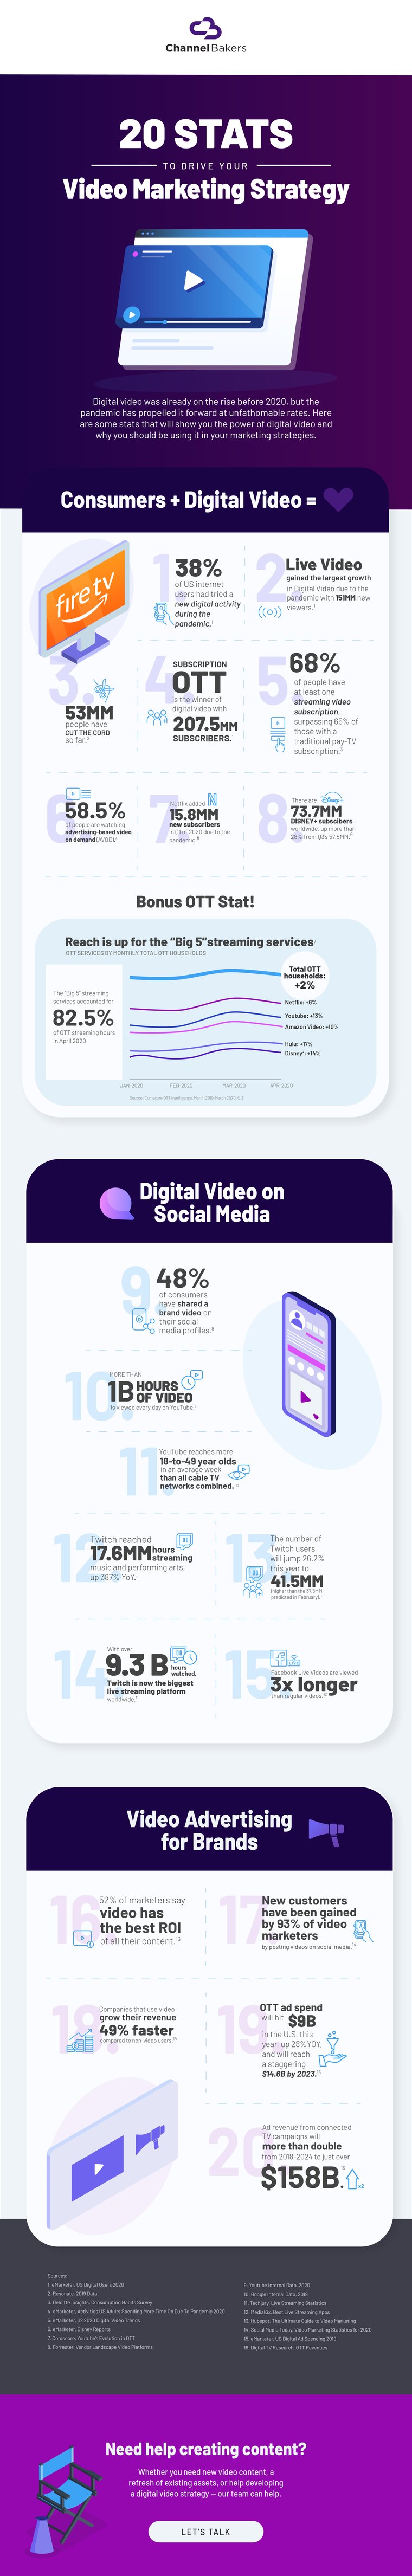 20 Stats Infographic of Video Marketing stats.